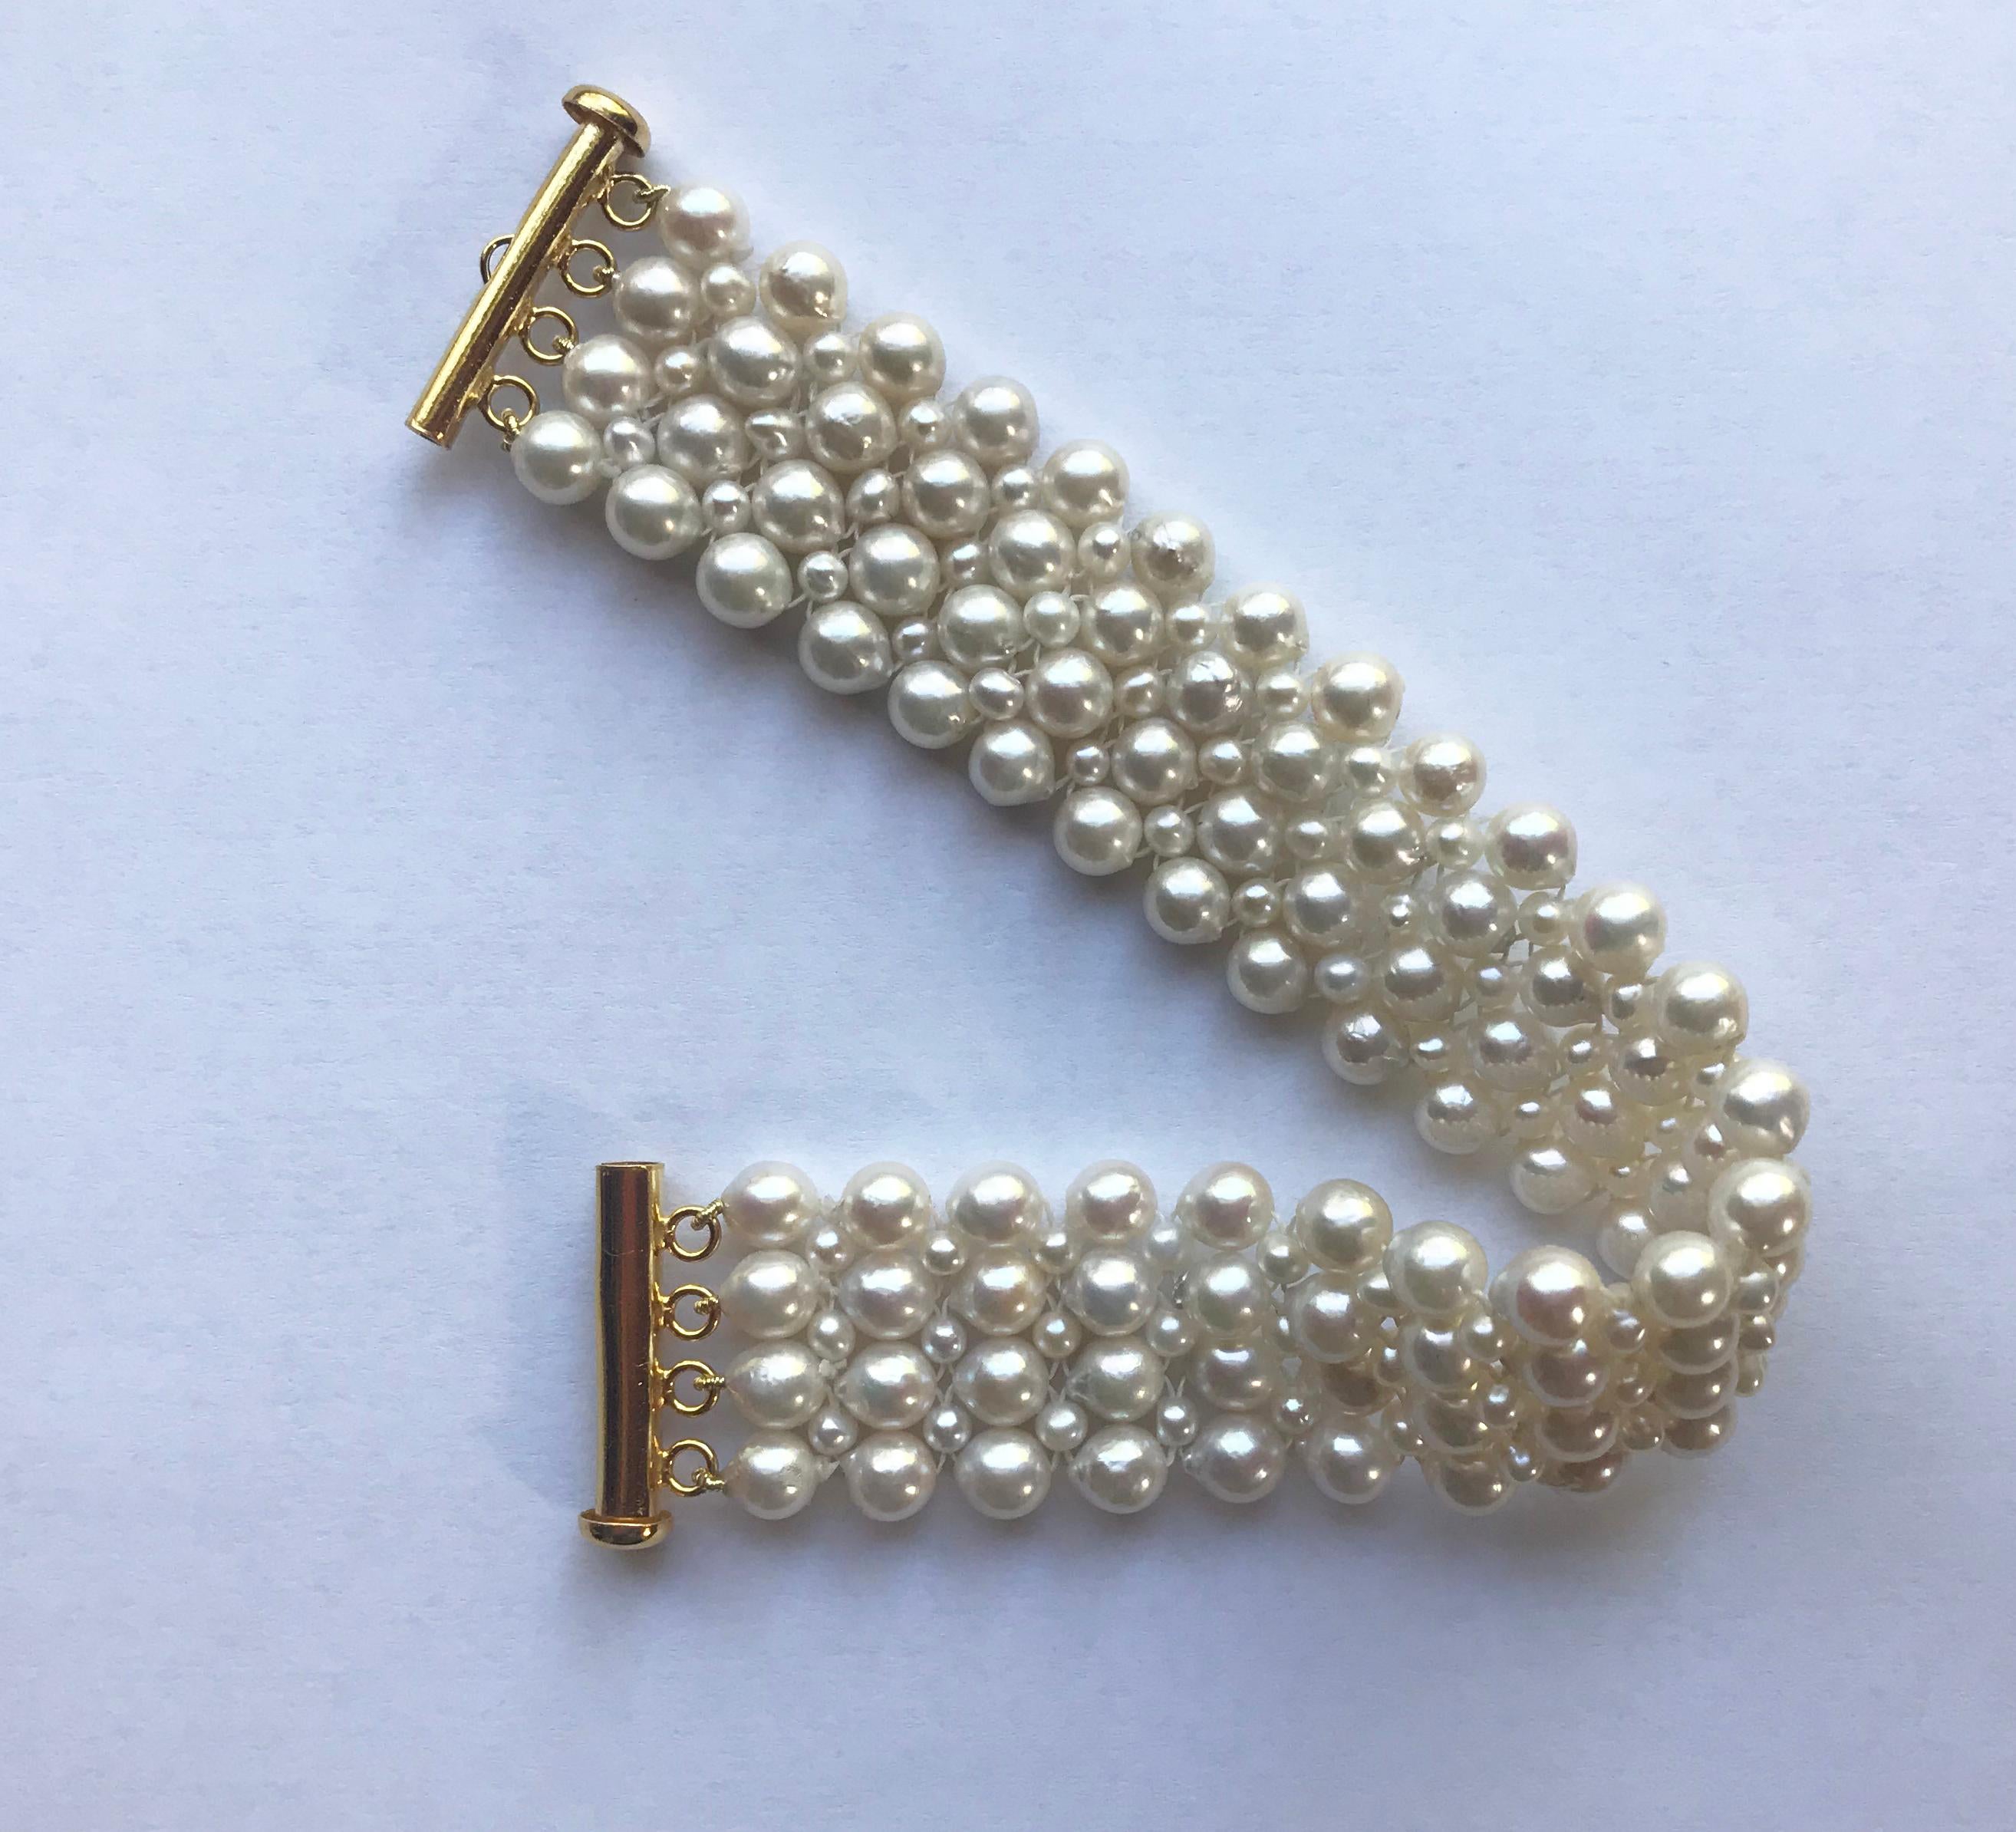 Marina J. Woven Pearl Bracelet with 14 Karat Yellow Gold Plated Clasp 5